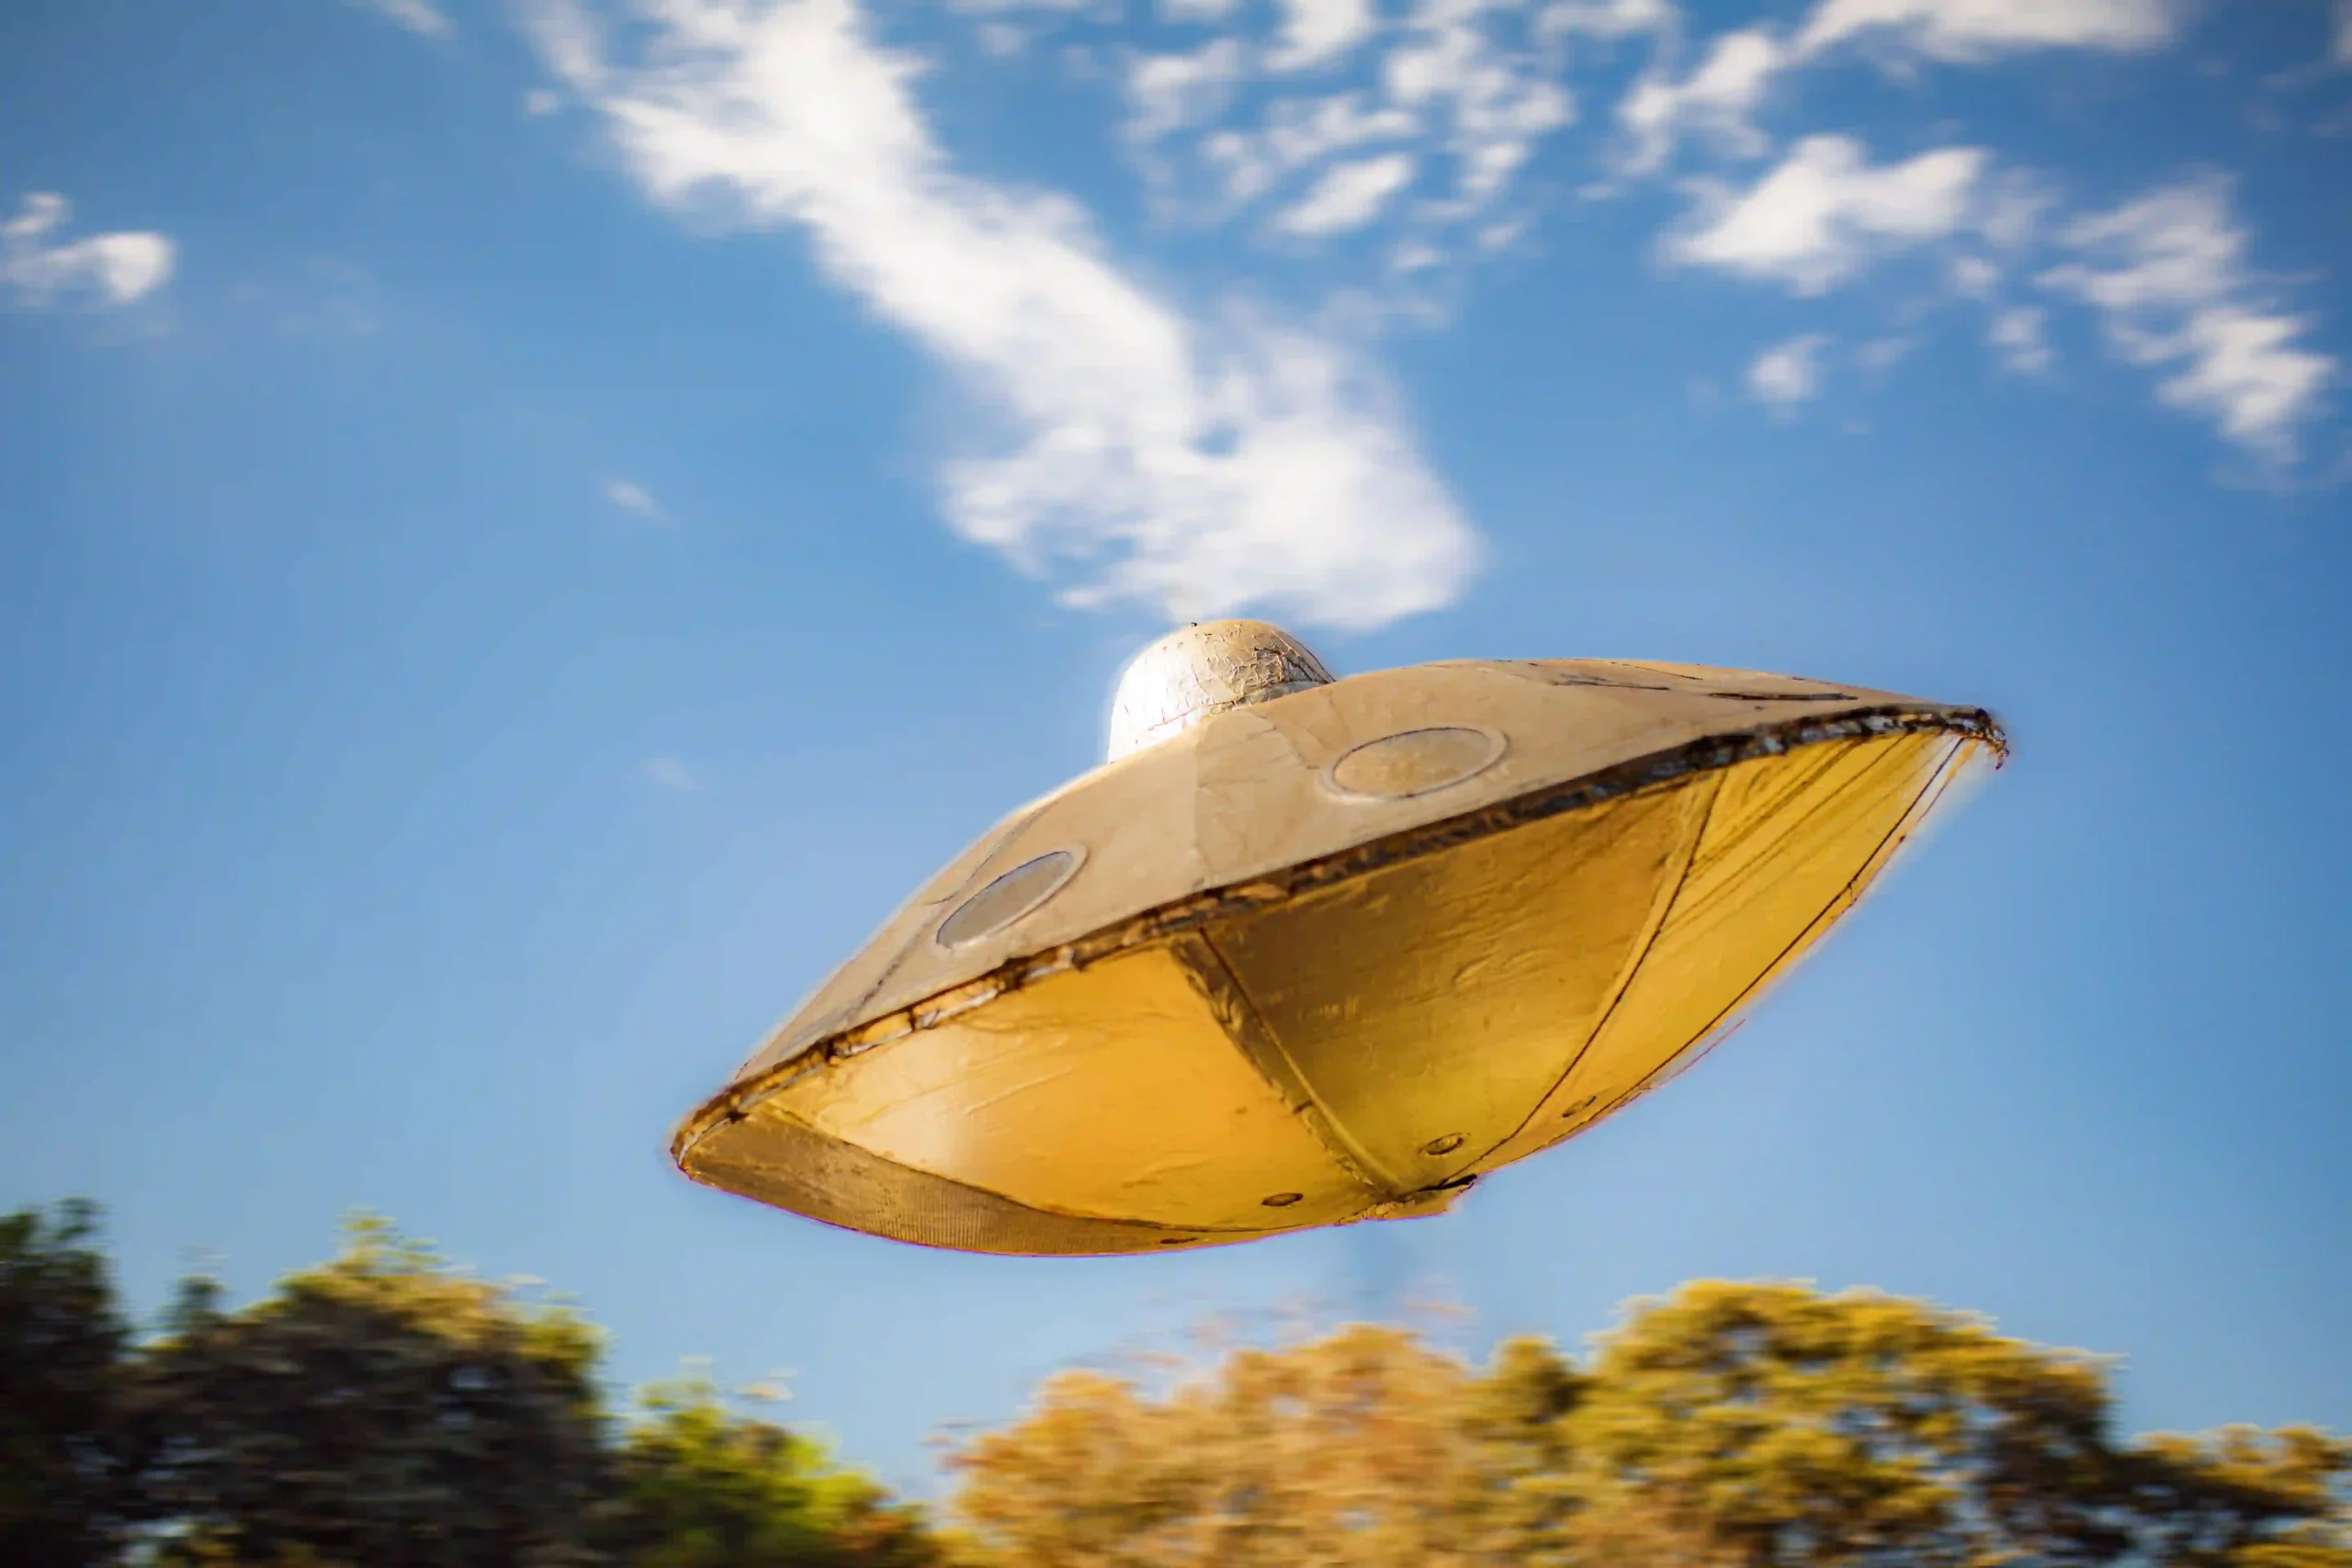 World UFO Day, Exploring the Mysteries of the Universe